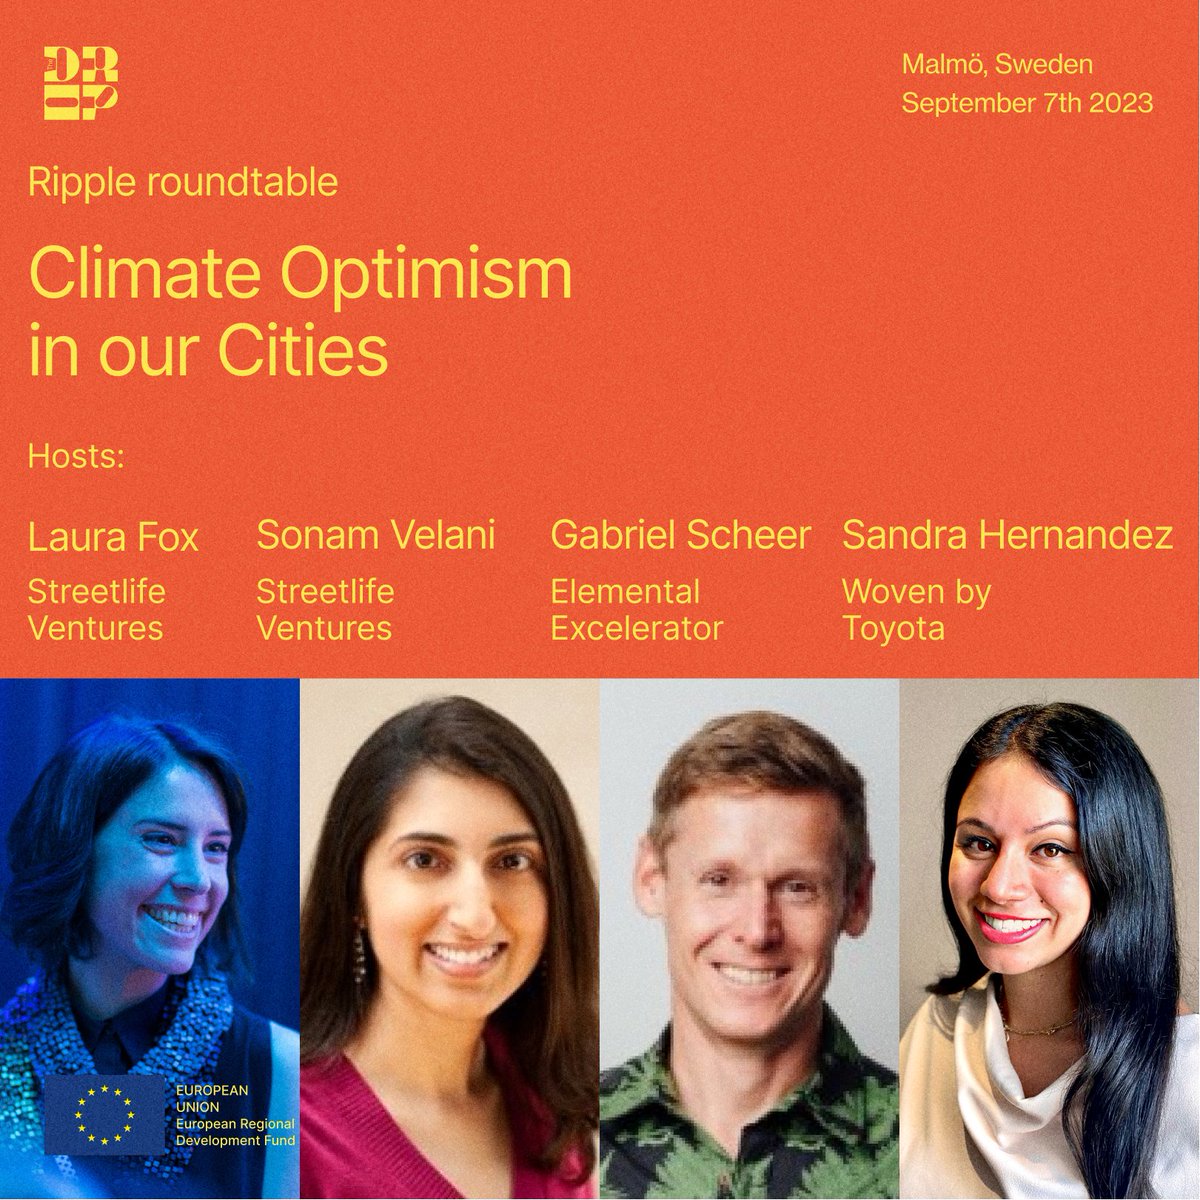 Join brilliant minds @artandfox, @sonamvelani (@streetlifevc), @gabrielscheer (@elementalexcel), & Sandra Hernandez (@wovenbytoyota) to explore ways climate tech can help cut carbon emissions & adapt our cities for a sustainable future at The Drop. 🌃🌱 🔗tinyurl.com/mv4t22zp